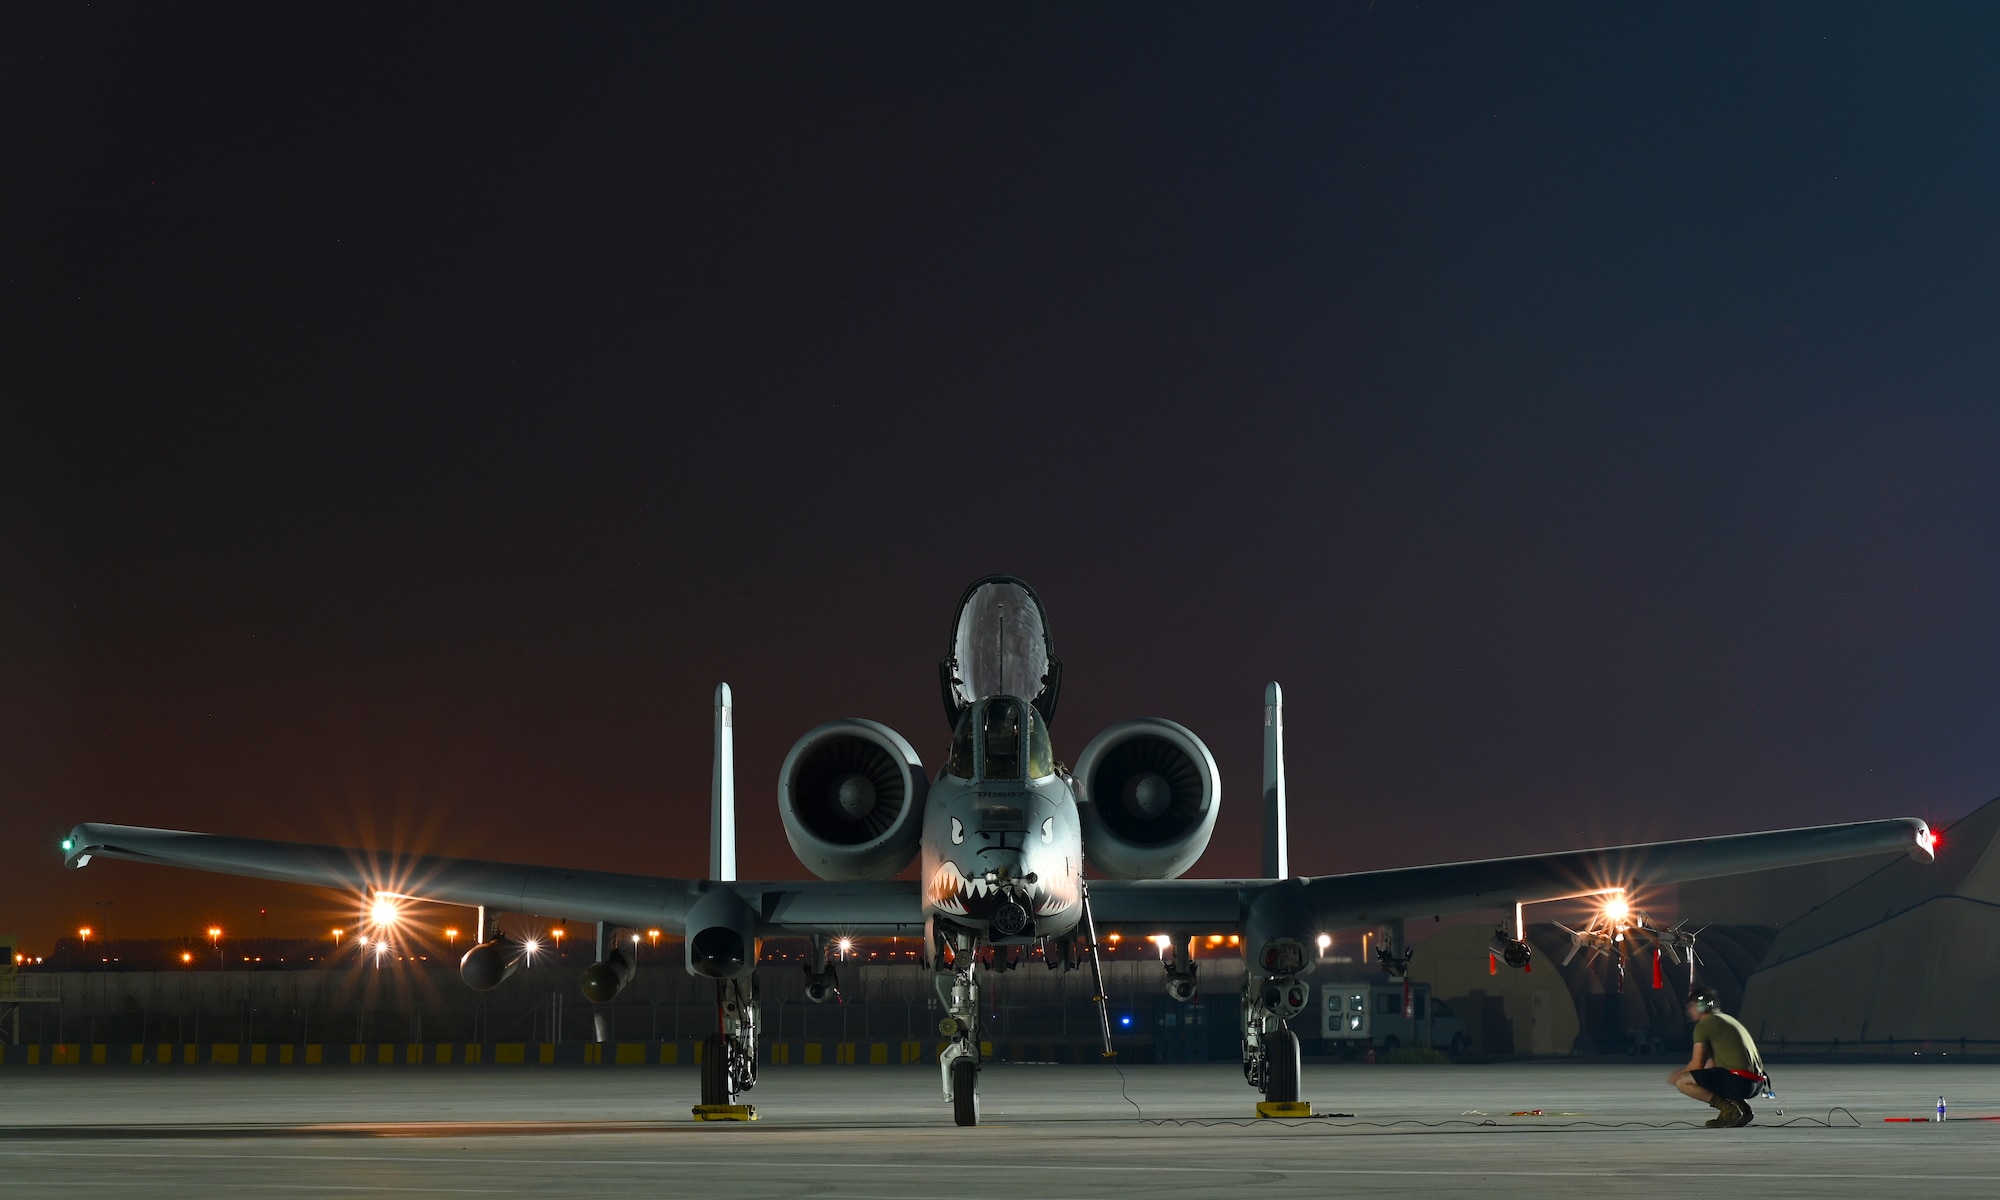 A U.S. Air Force pilot assigned to the 75th Expeditionary Fighter Squadron prepares to taxi an A-10 Thunderbolt II prior to a combat sortie in the U.S. Central Command area of responsibility at Al Dhafra Air Base, United Arab Emirates, April 20, 2022. The deployment of A-10s in the region provides additional capability in the Middle East alongside fighter aircraft. This deployment ensures close air support specialists are able to build upon their skills in environments outside of the United States and ensure combat operations remain sharp across the force. (U.S. Air Force photo by Tech. Sgt. Alex Fox Echols III)